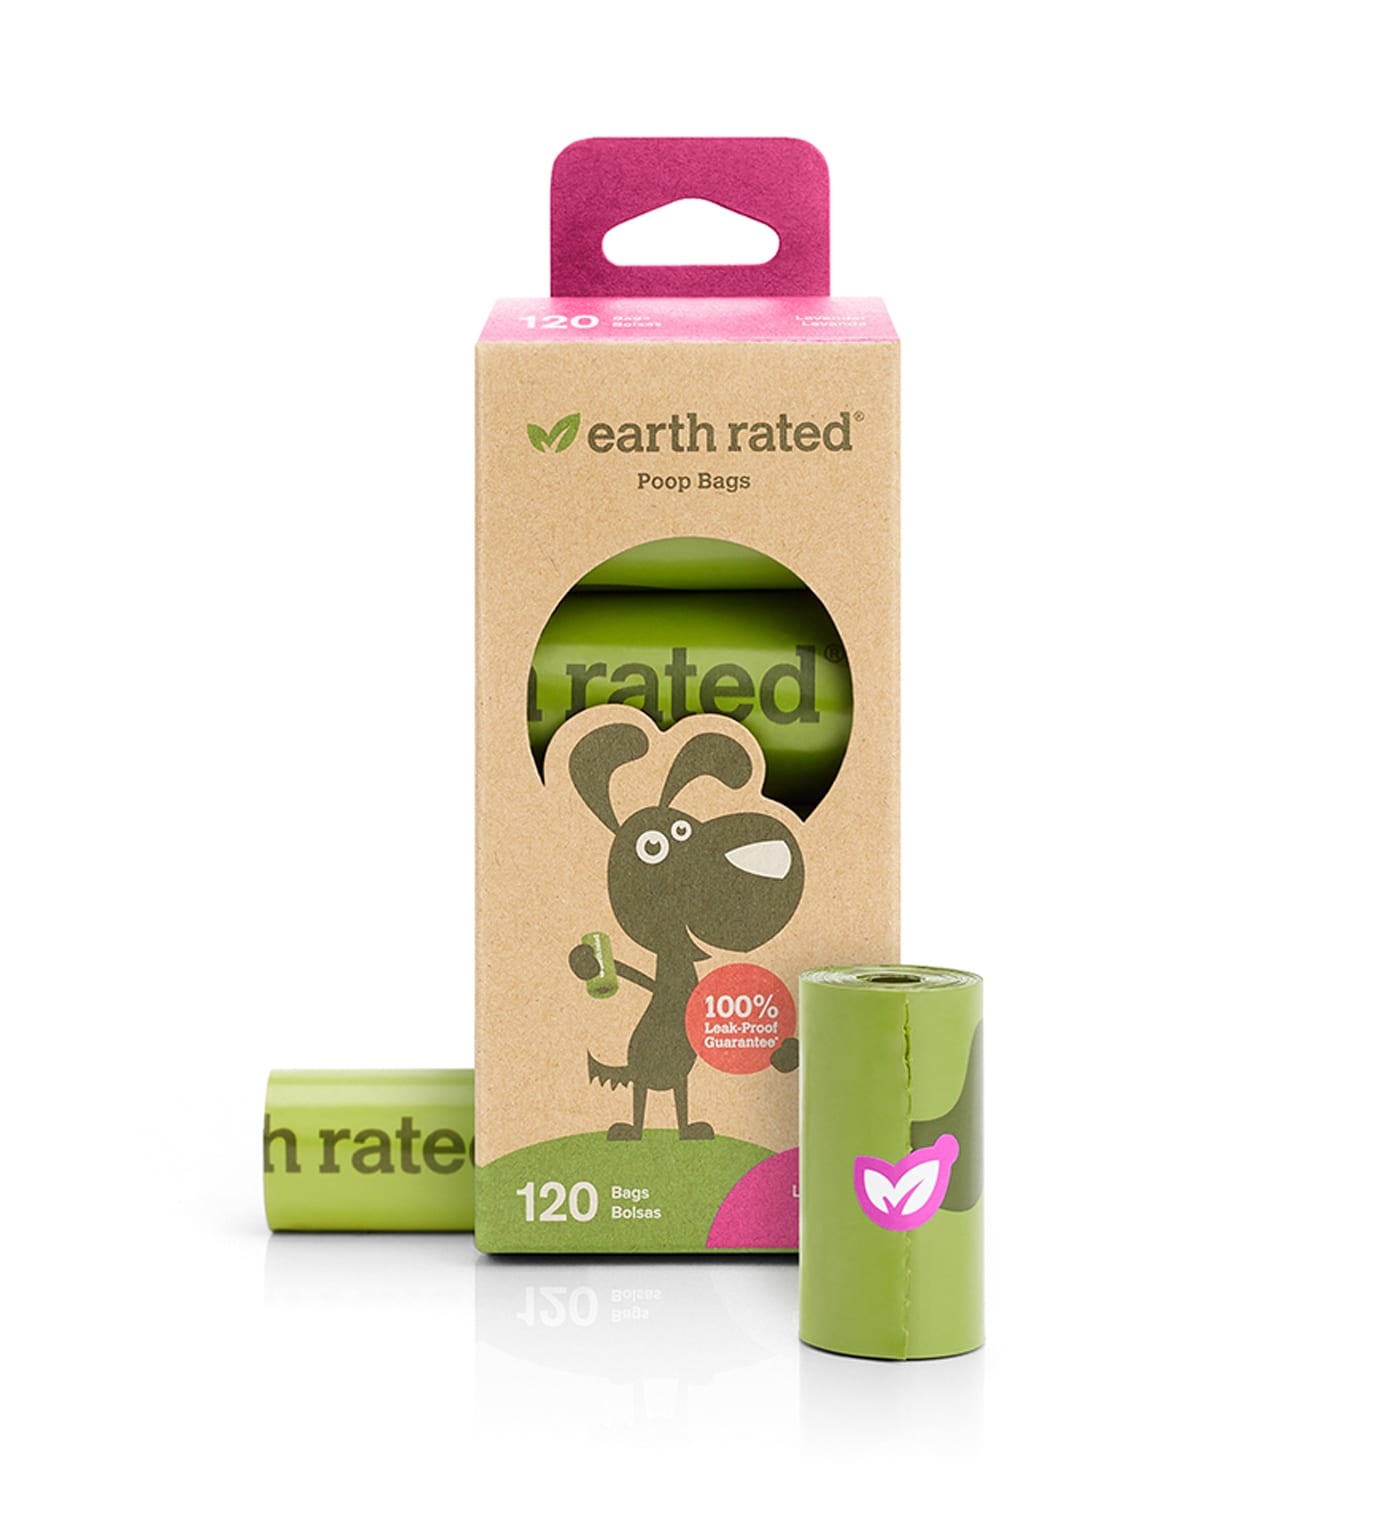 Earth Rated Earth Rated Poop Bags 8/120 Count